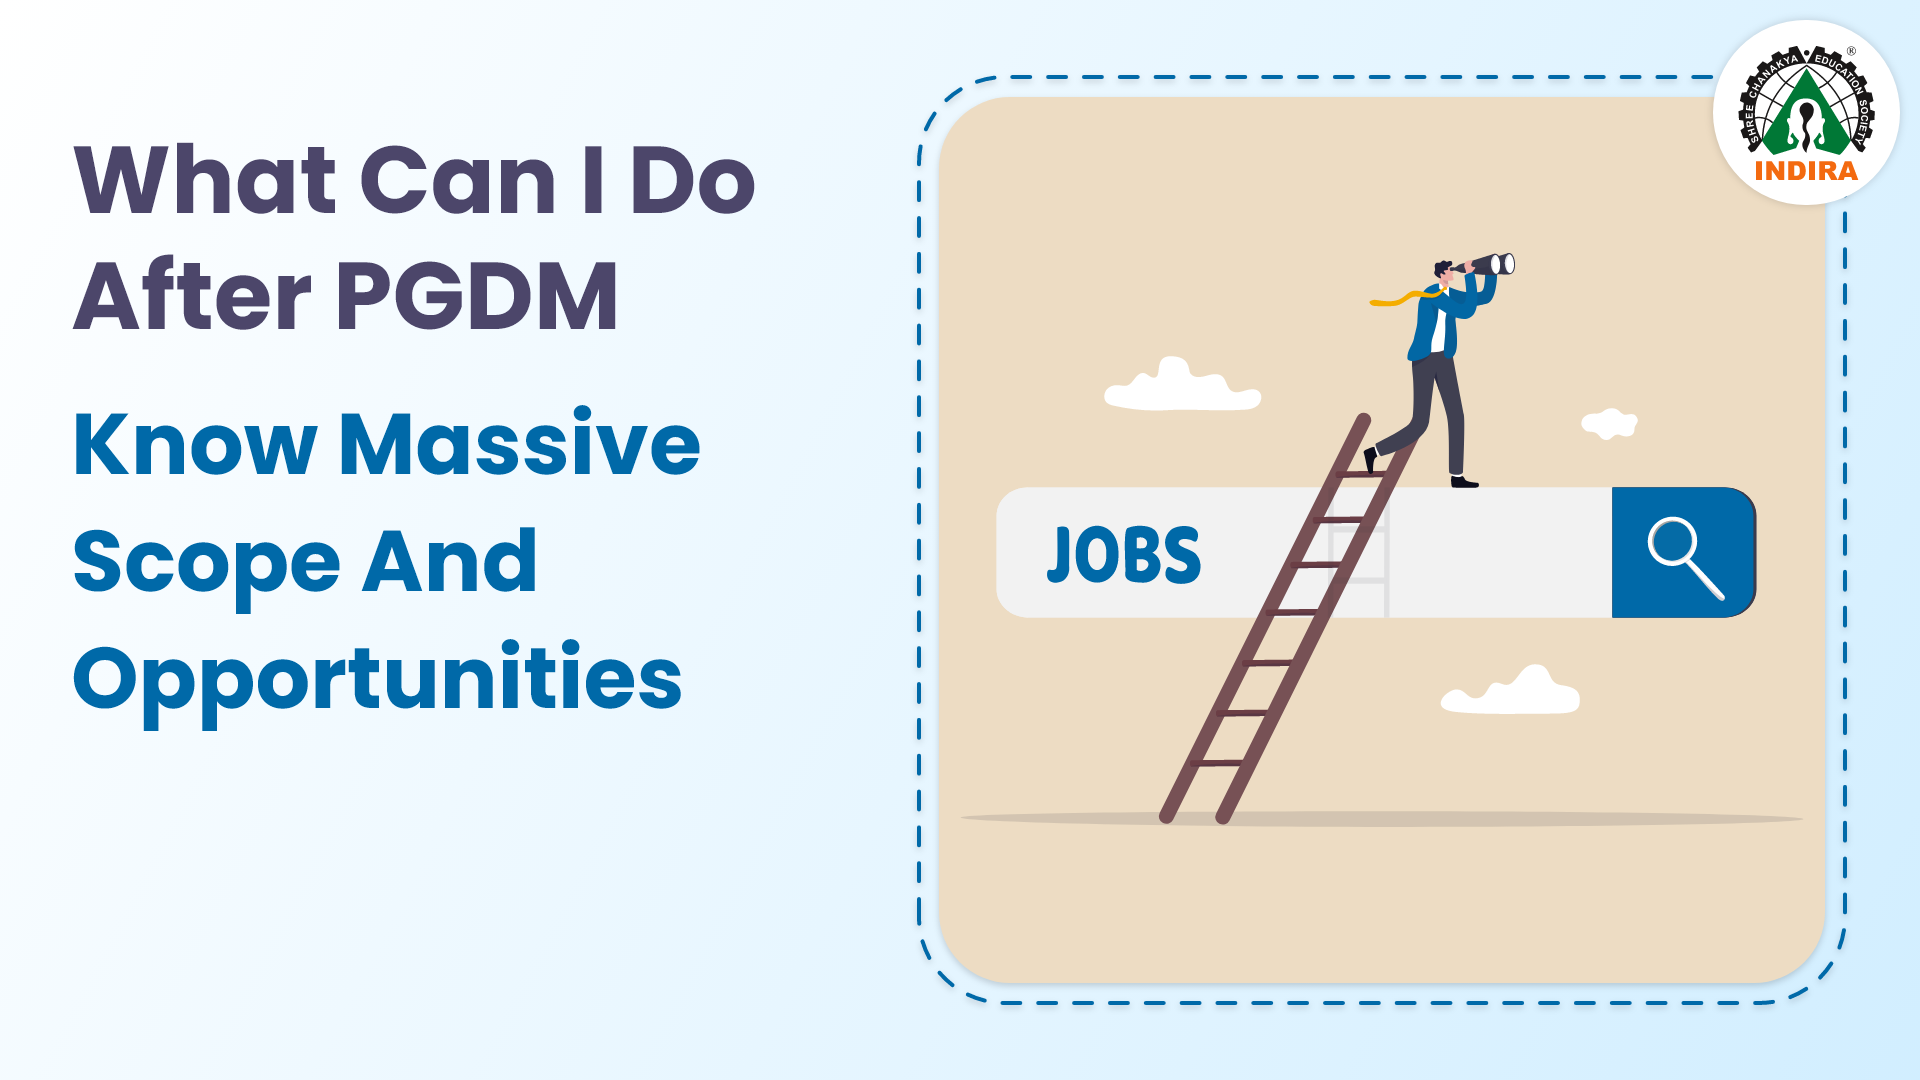 After PGDM what can I do? Know massive Scope and opportunities.